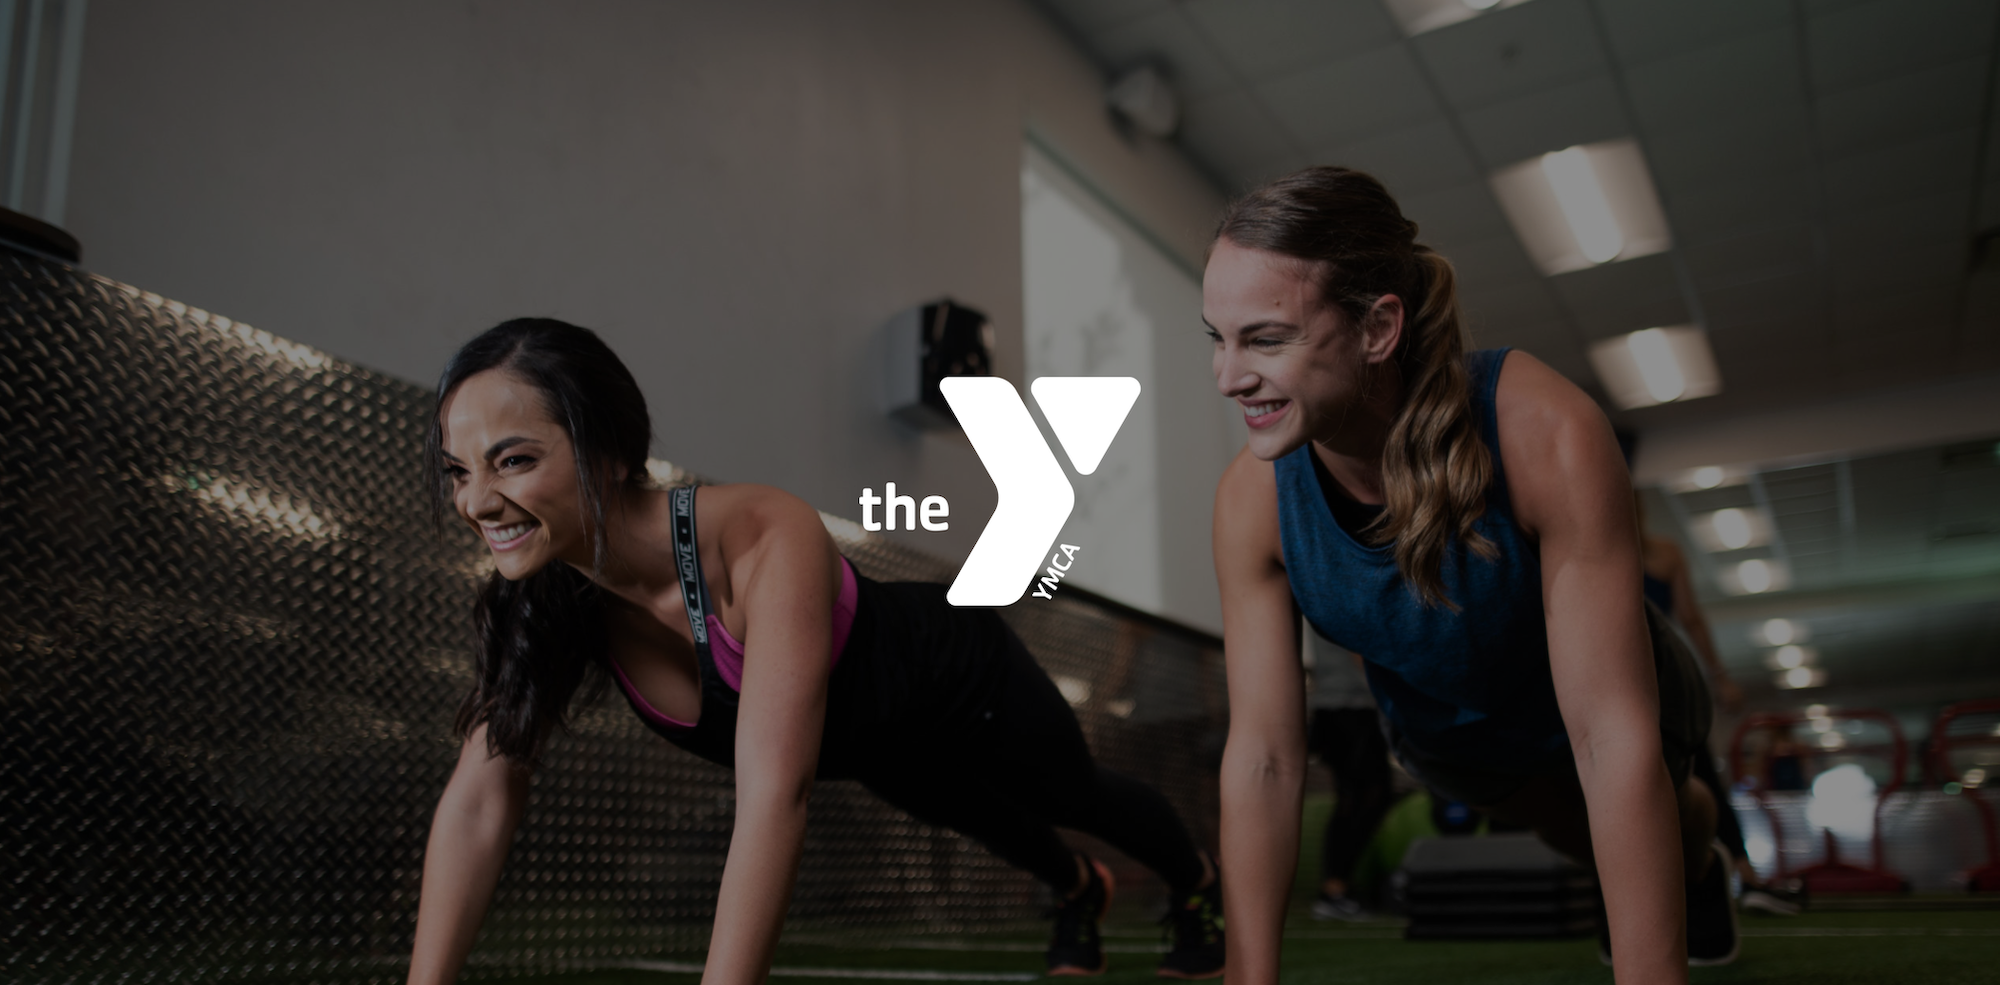 Two young women with long hair doing pushups at the YMCA.